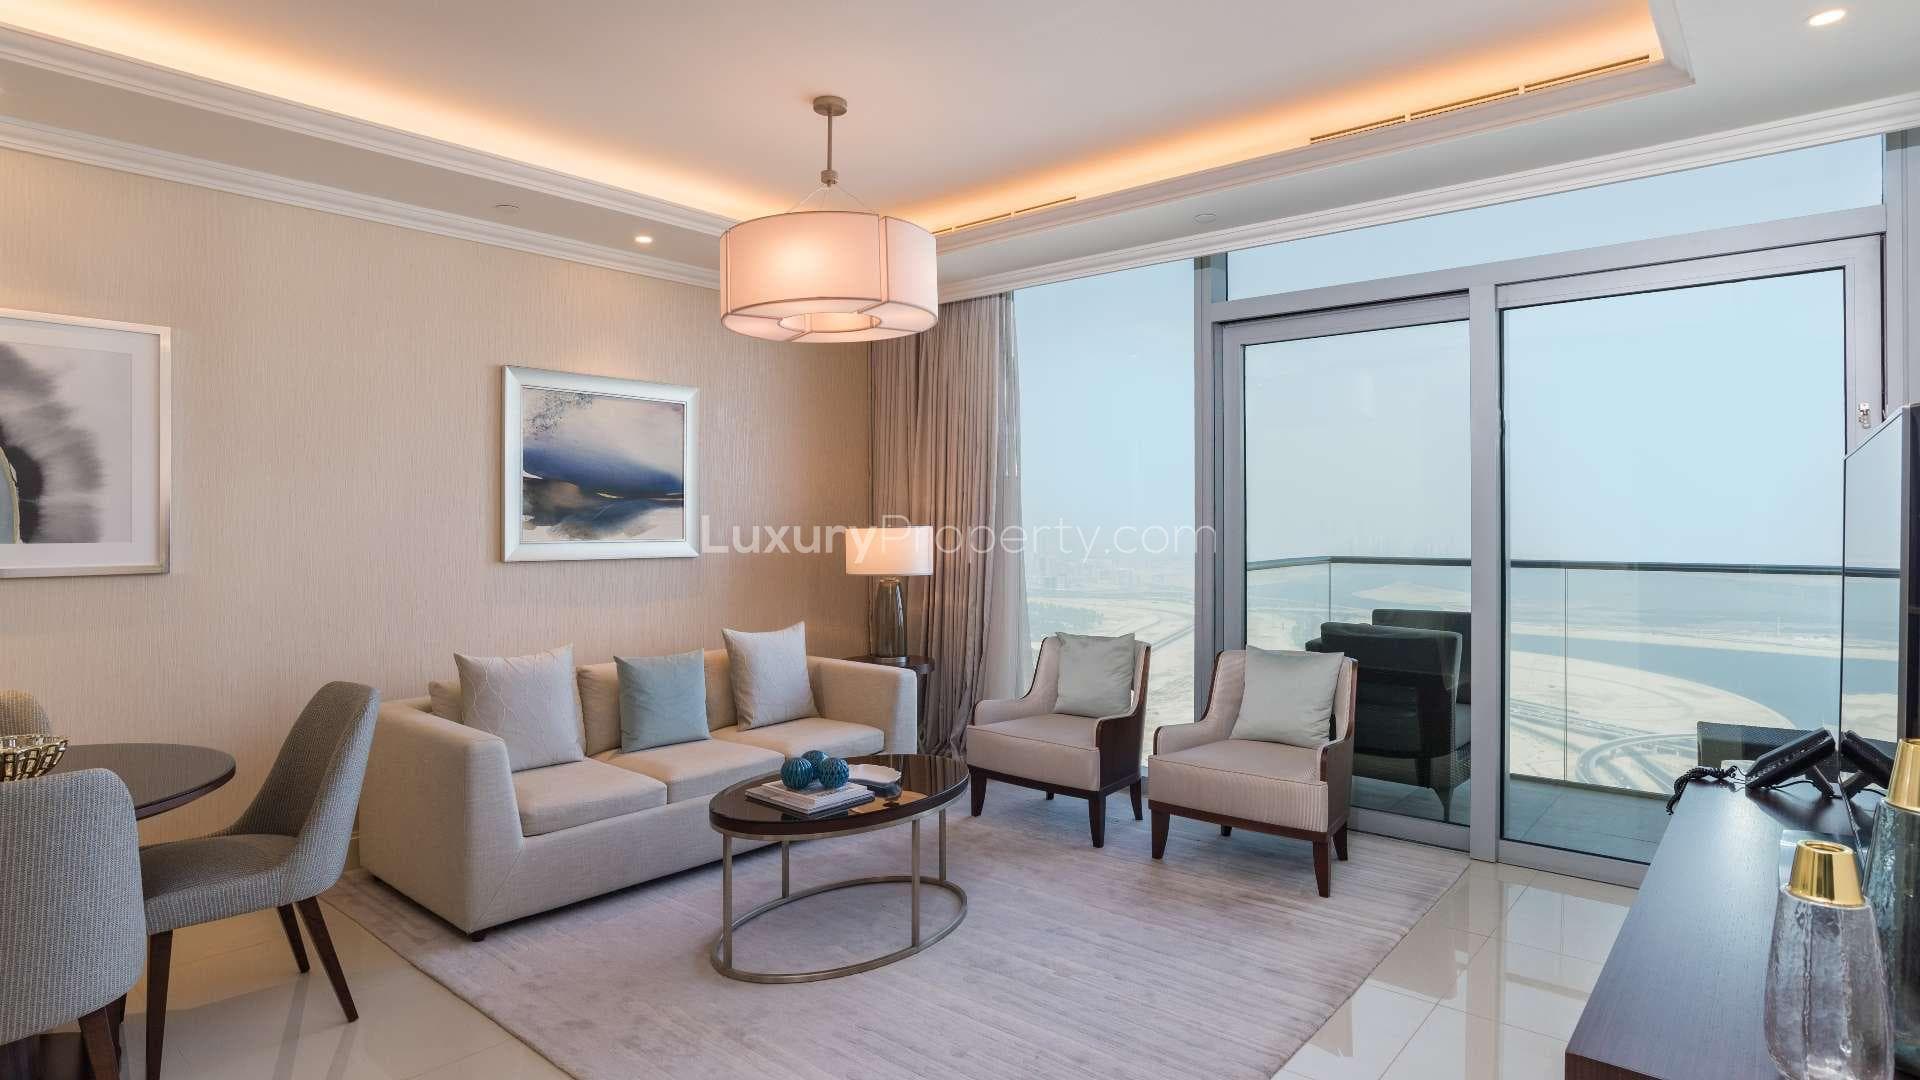 1 Bedroom Apartment For Sale The Address Residence Fountain Views Lp20135 B5774822df9d100.jpg